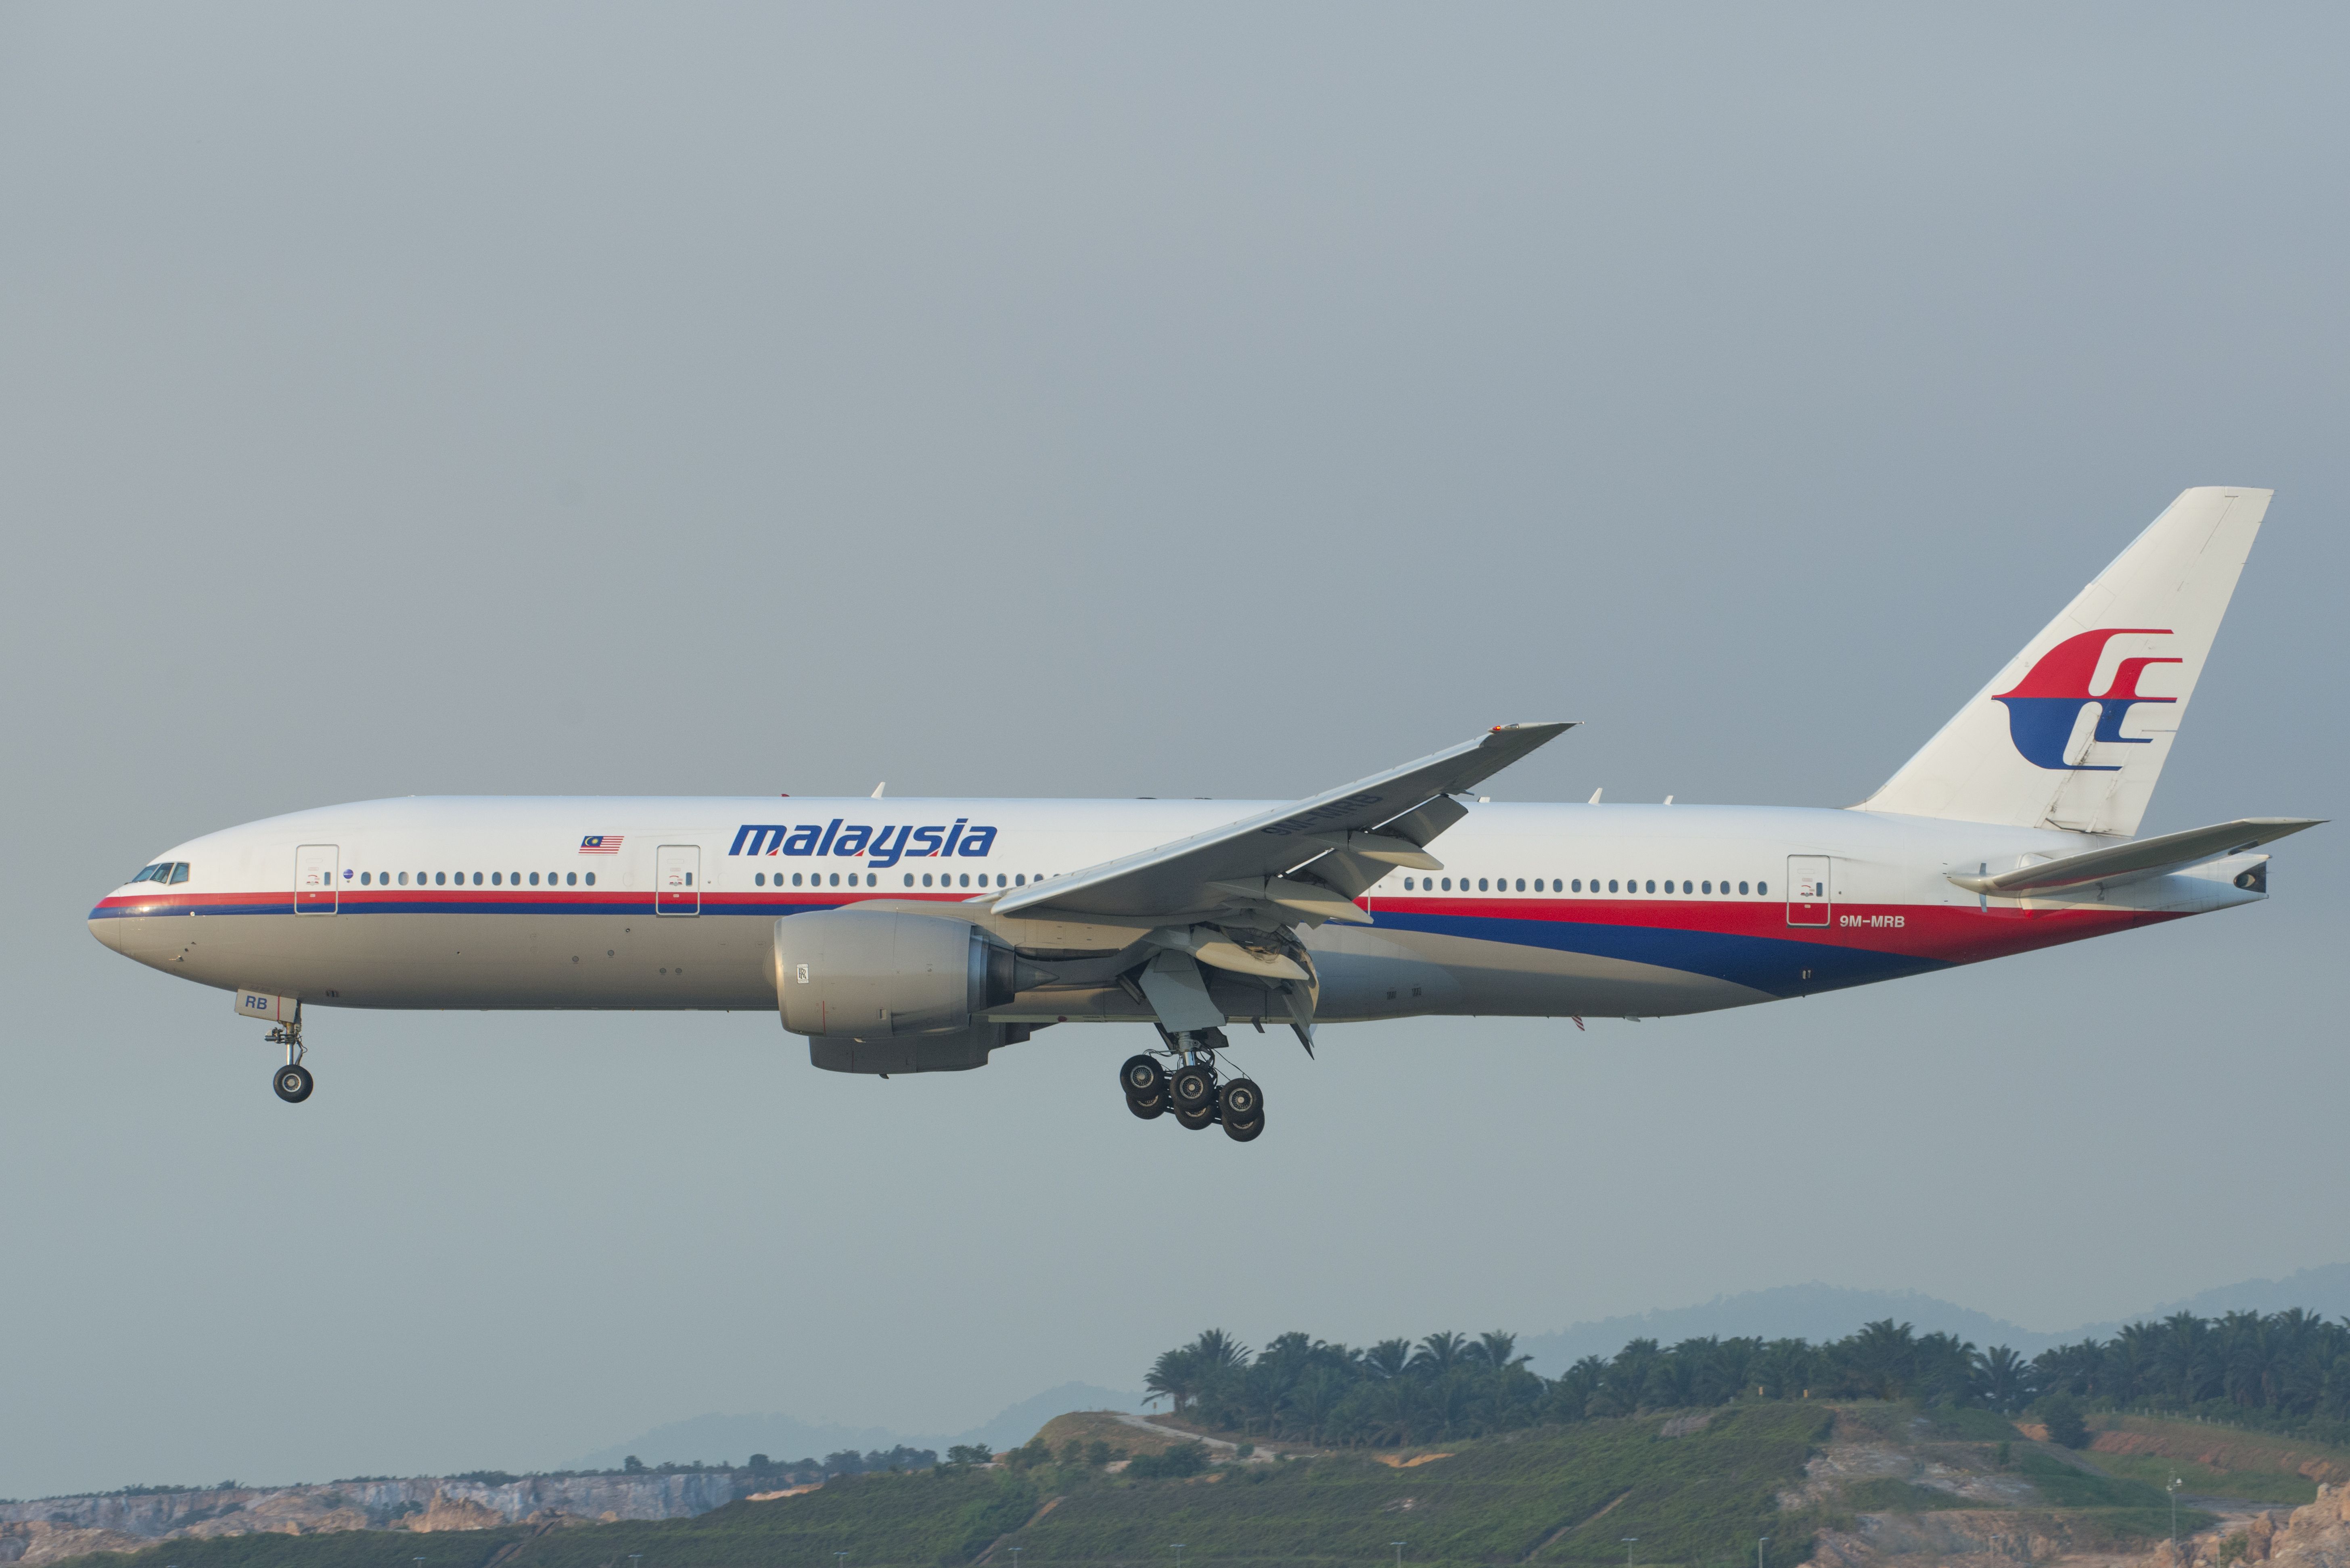 Malaysia Airlines Boeing 777-200ER.